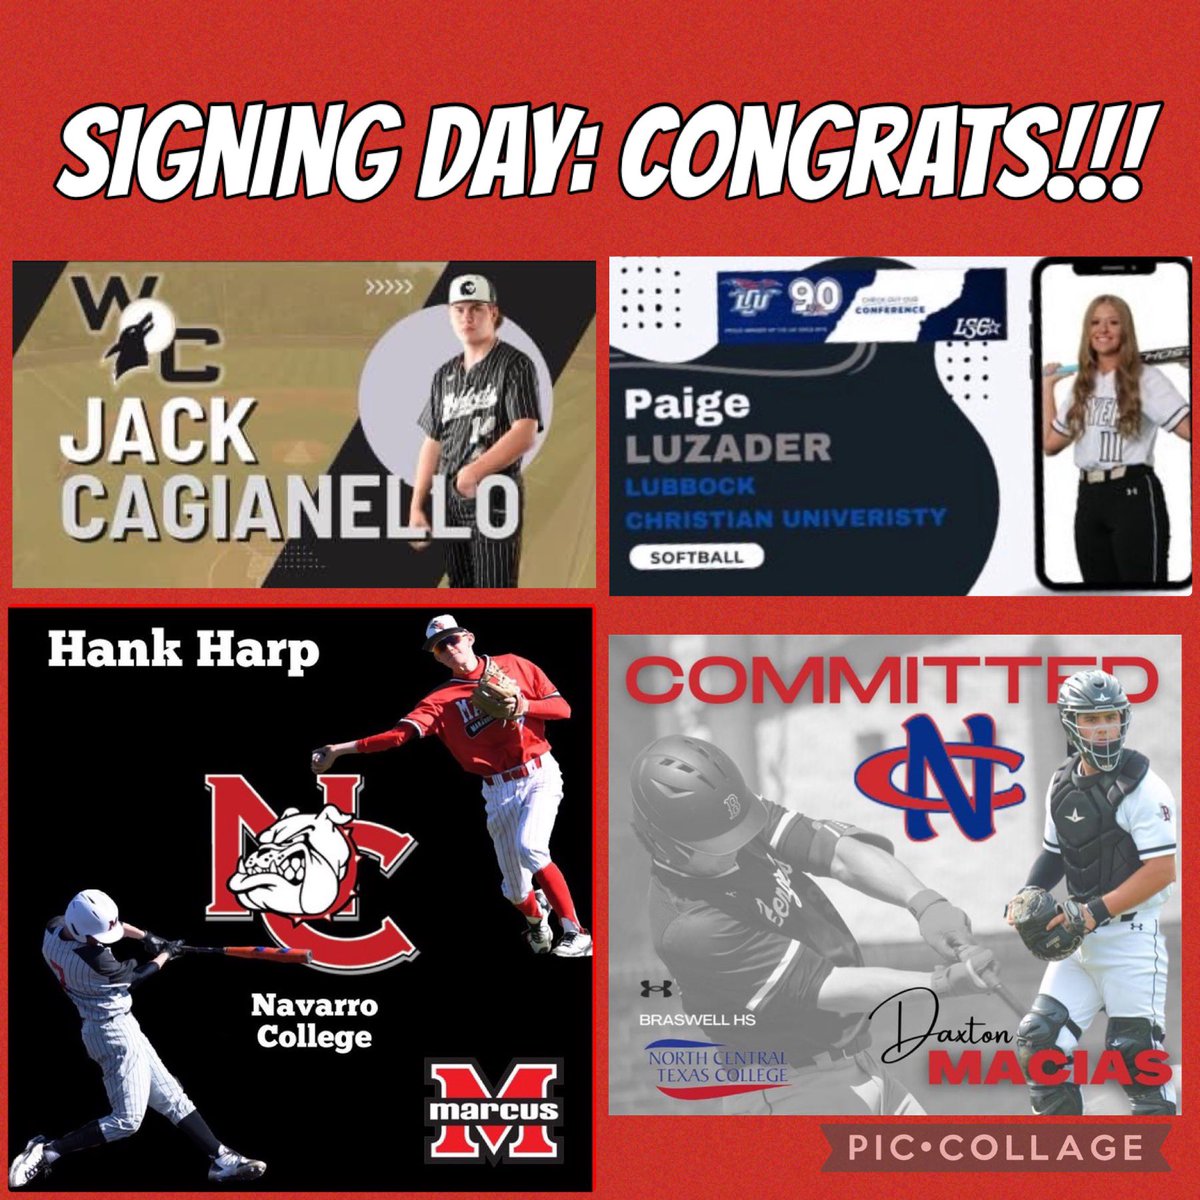 SIGNING DAY
Congrats to these 4 athletes who have spent so many hrs working to get to this day! Well deserved!
@HankHarp @MarcusBaseball @NavarroBasebal1 
@jackcag14 @Guyer_Baseball @WCoyoteBaseball 
@paige_luzader @GuyerSoftball
@LCUCHAPS 
@DaxtonMacias Braswell @NctcBaseball